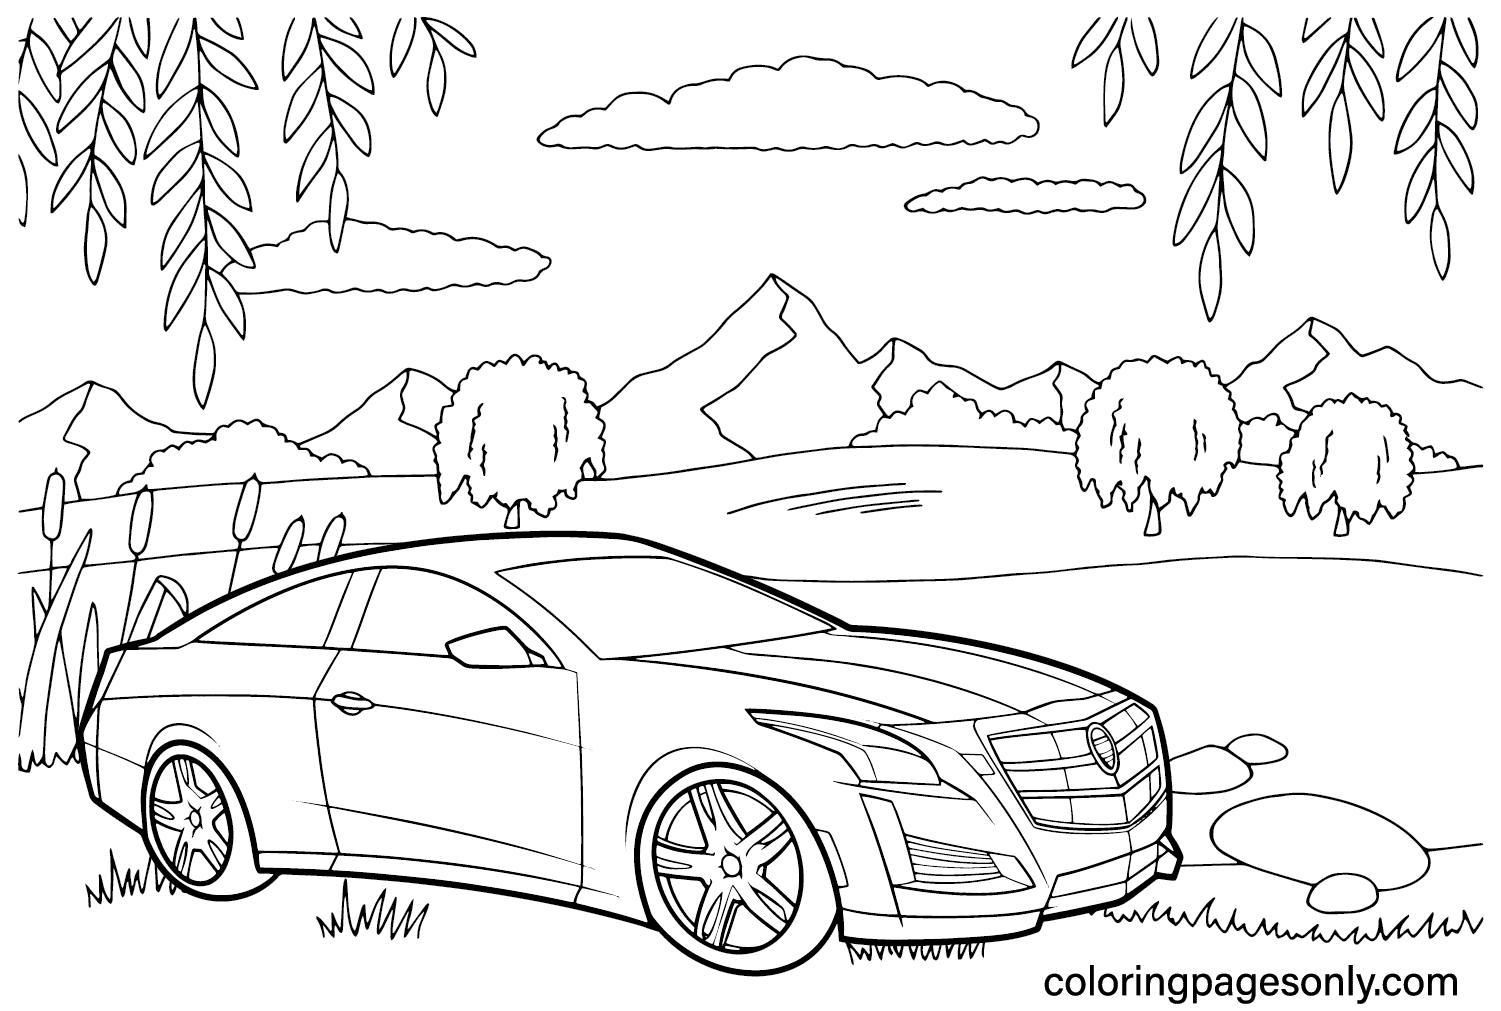 Cadillac Coloring Page to Print - Free Printable Coloring Pages